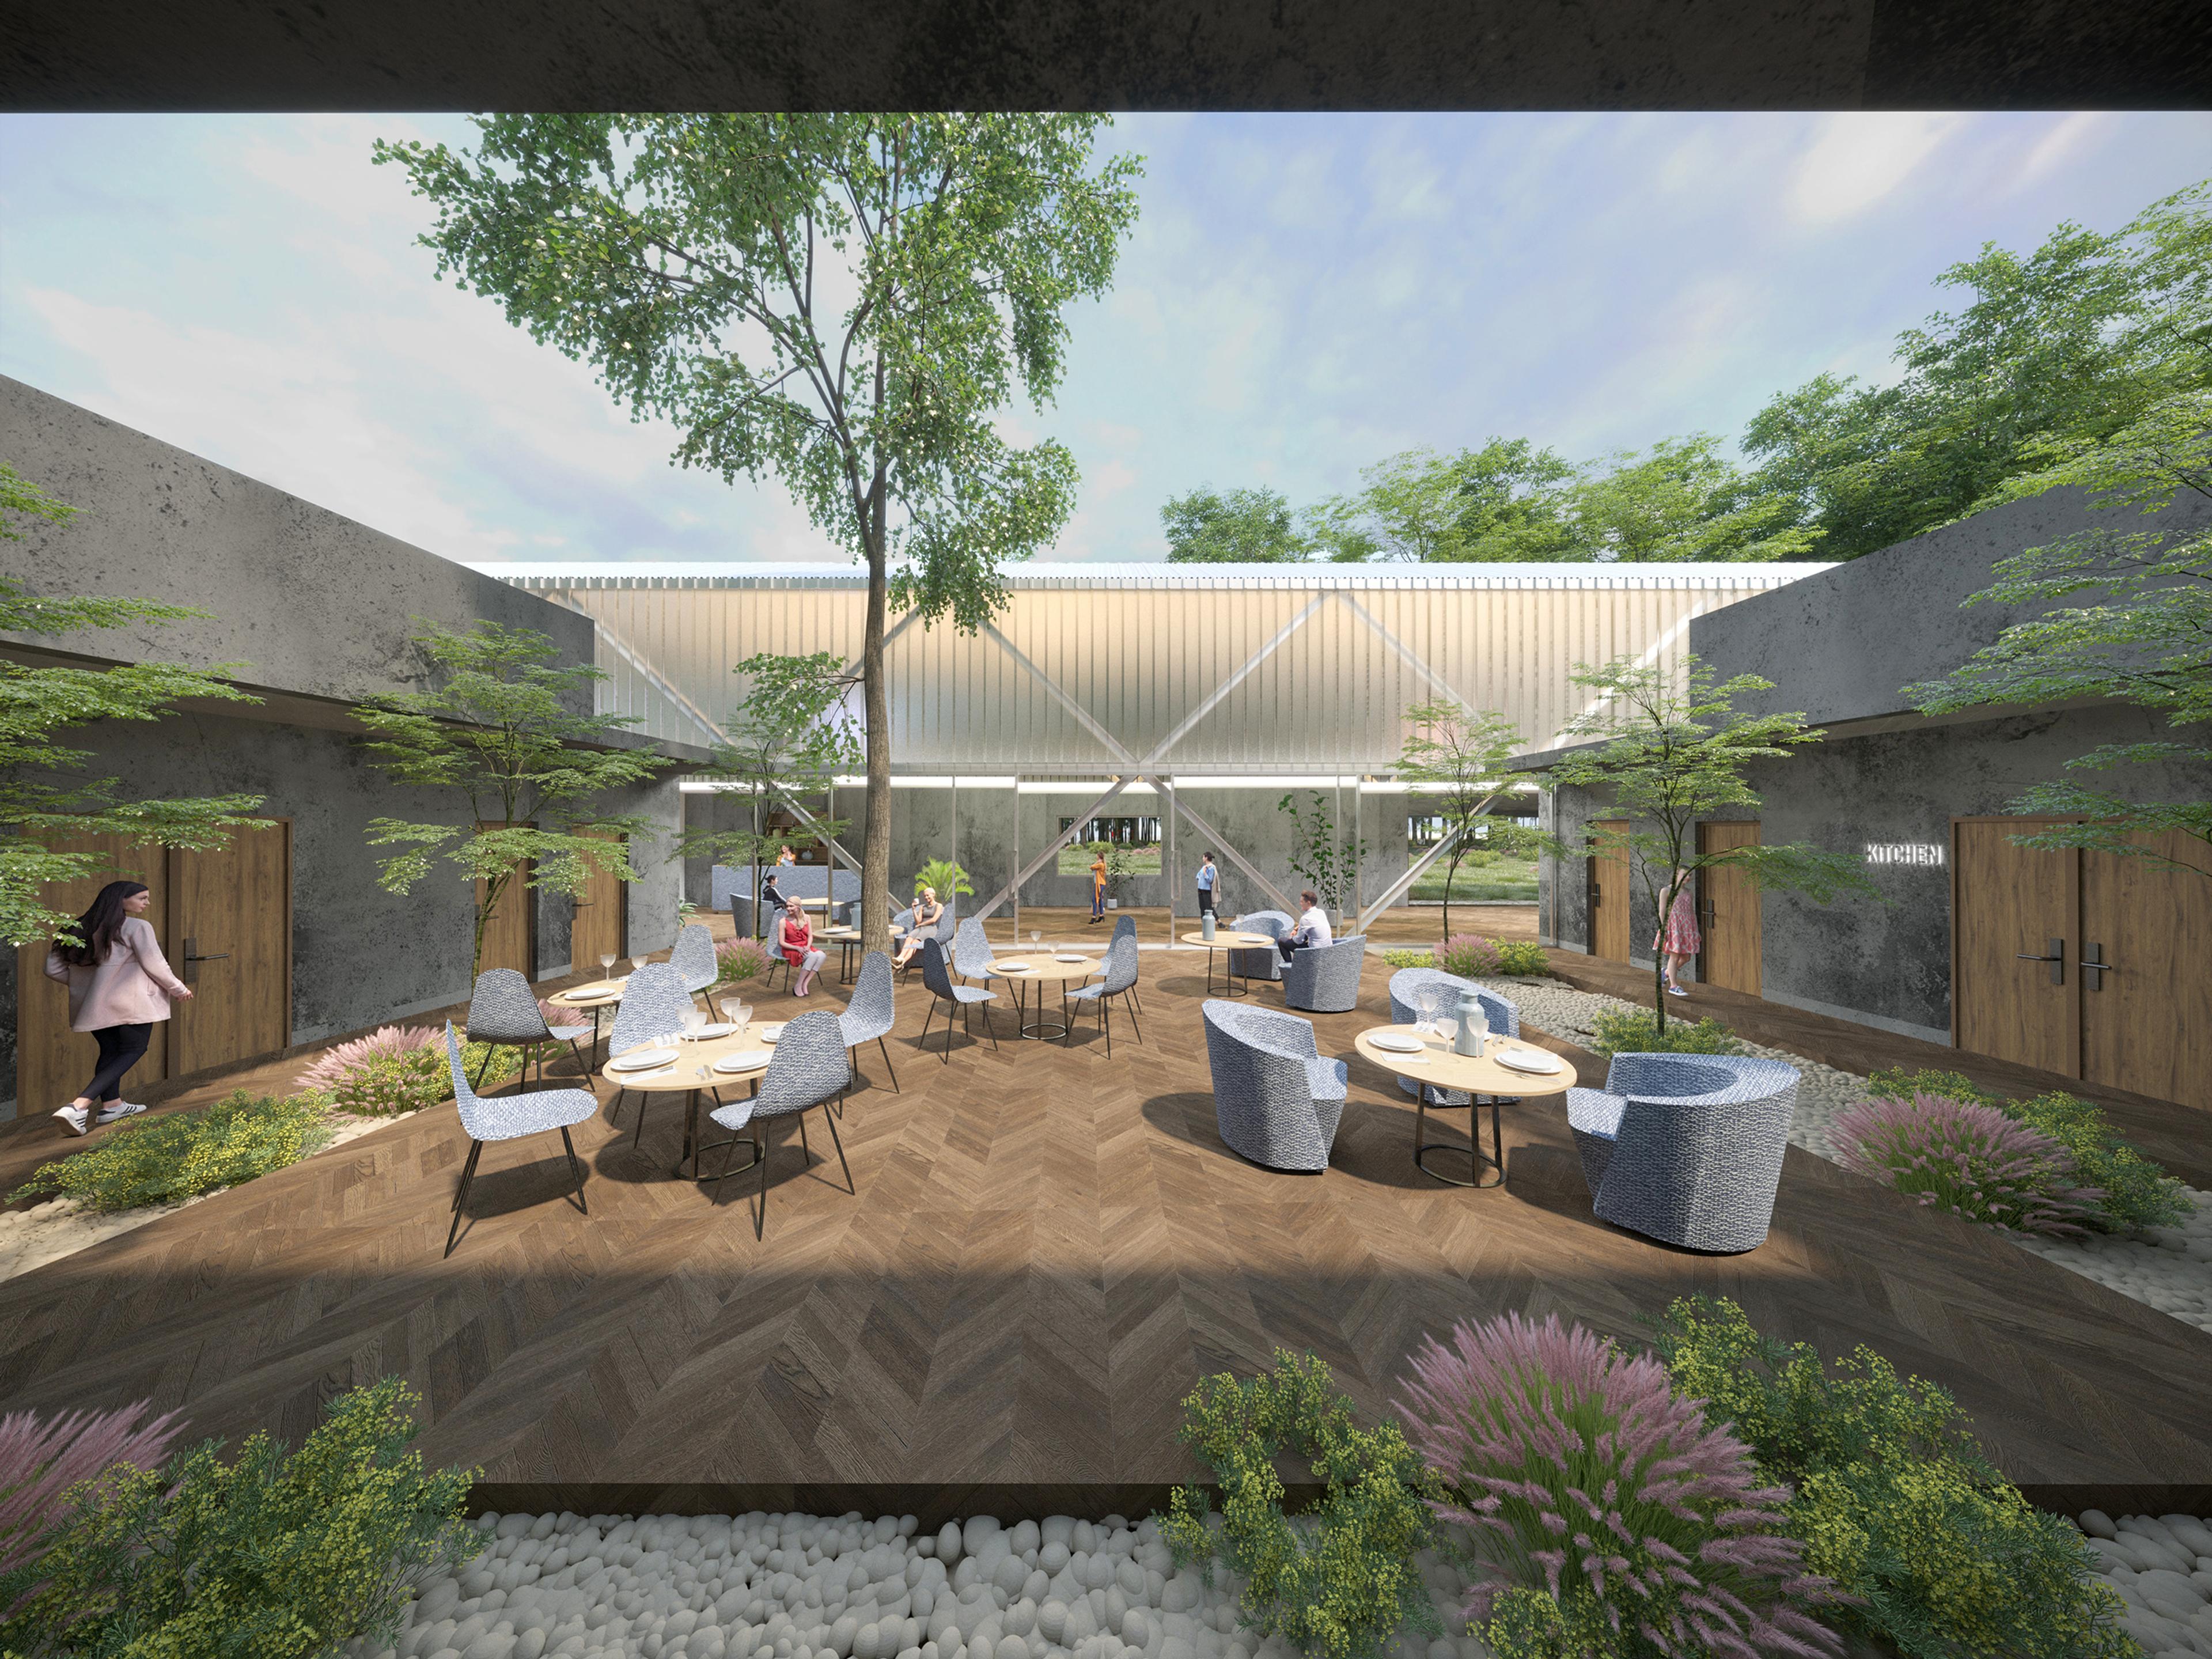 architectural rendering of cafe space within a building courtyard with trees tables and chairs